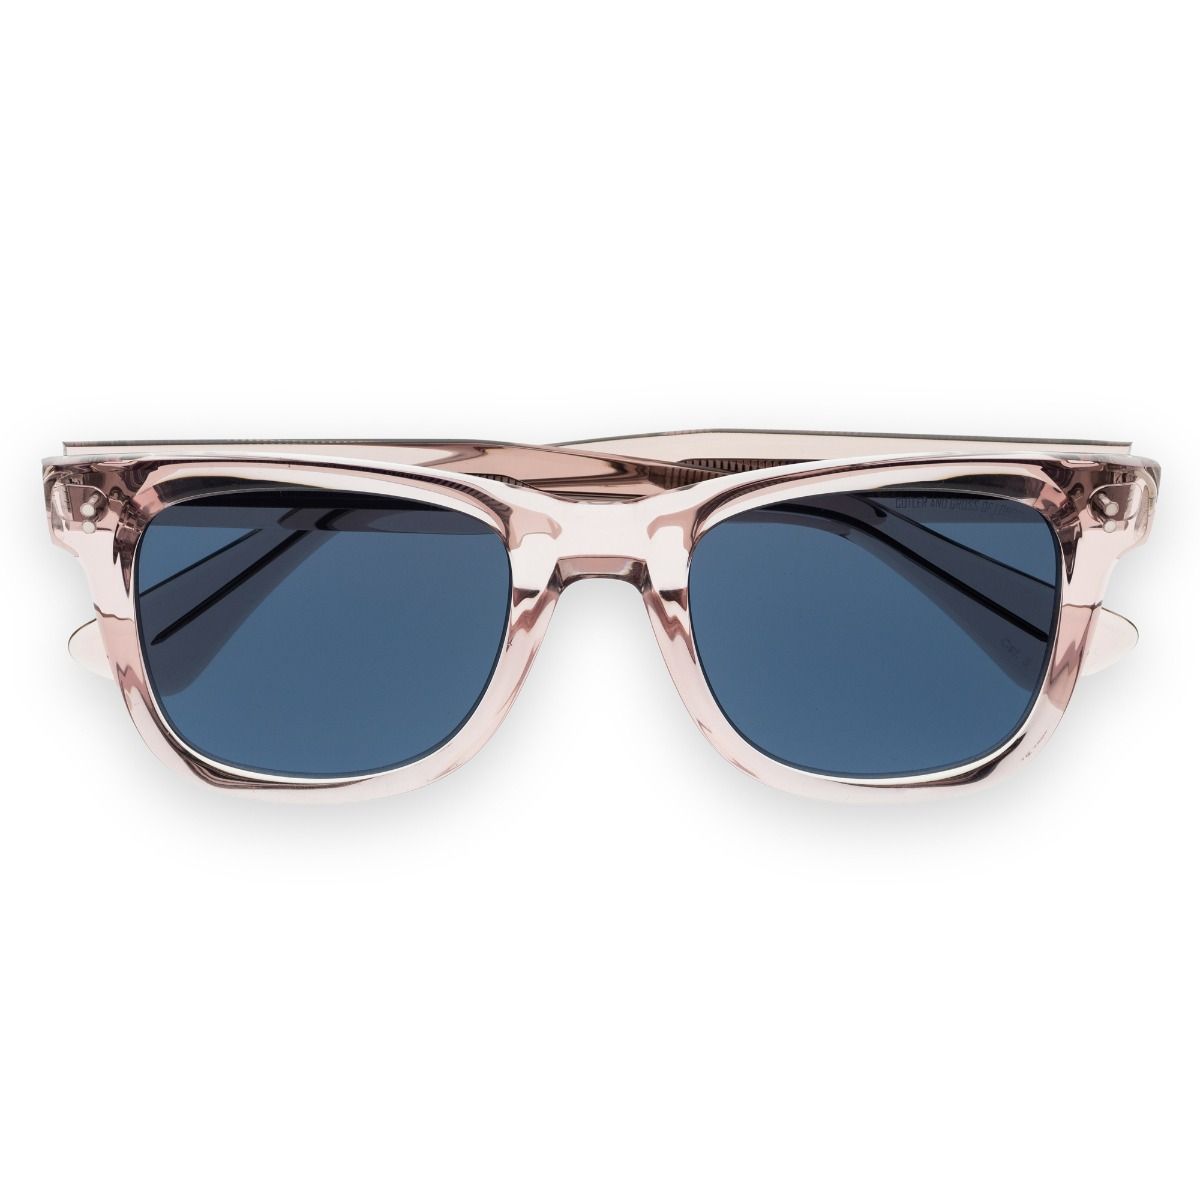 Cutler and Gross, 9101 Square Sunglasses - Dusk Blue